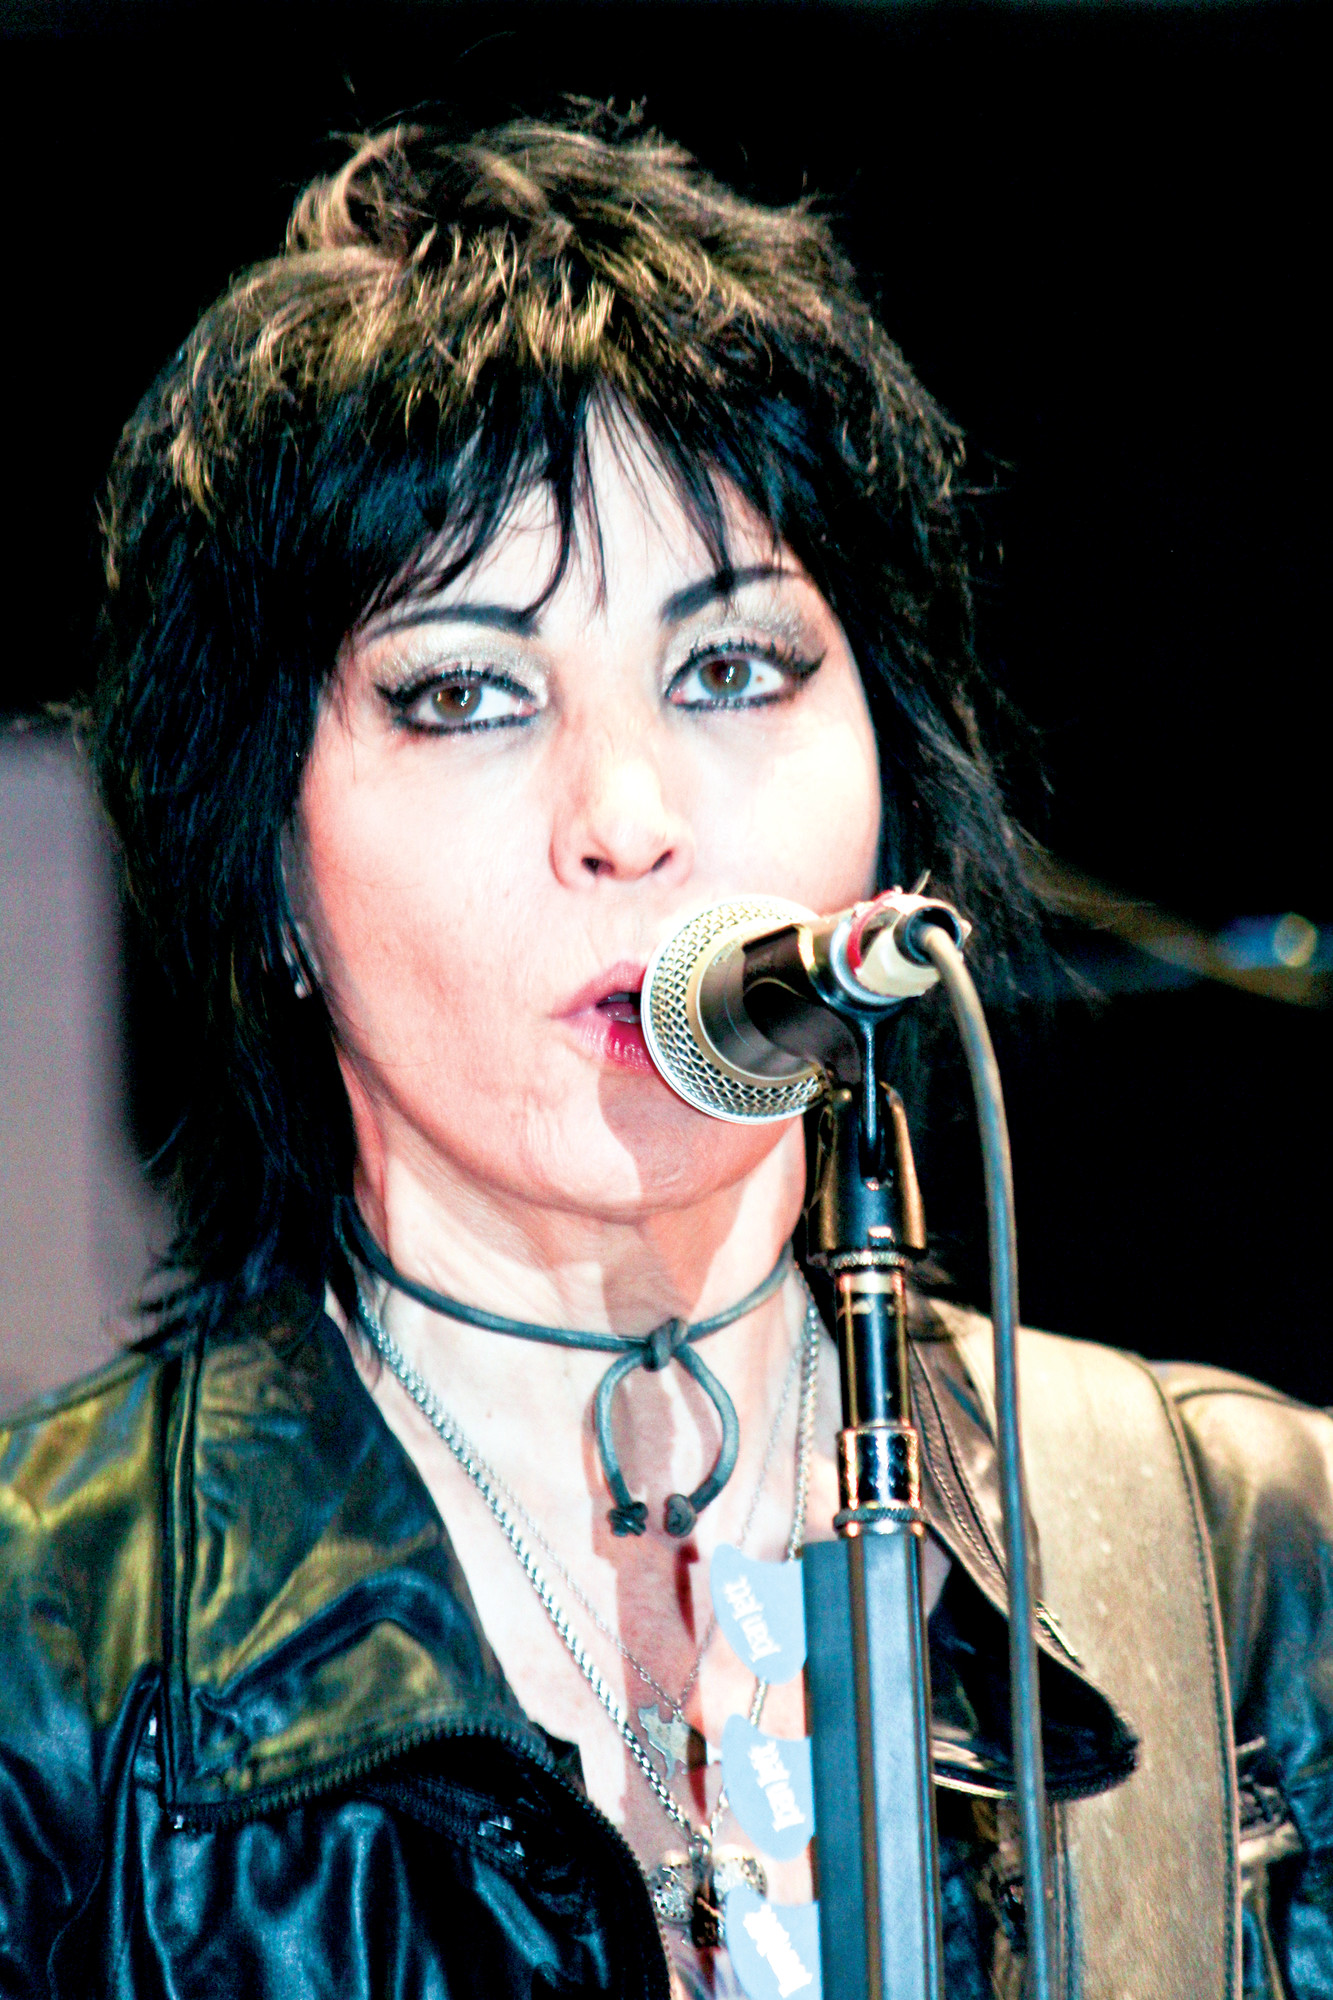 Joan Jett and the Blackhearts rocked the stage for more than 22,000 fans.